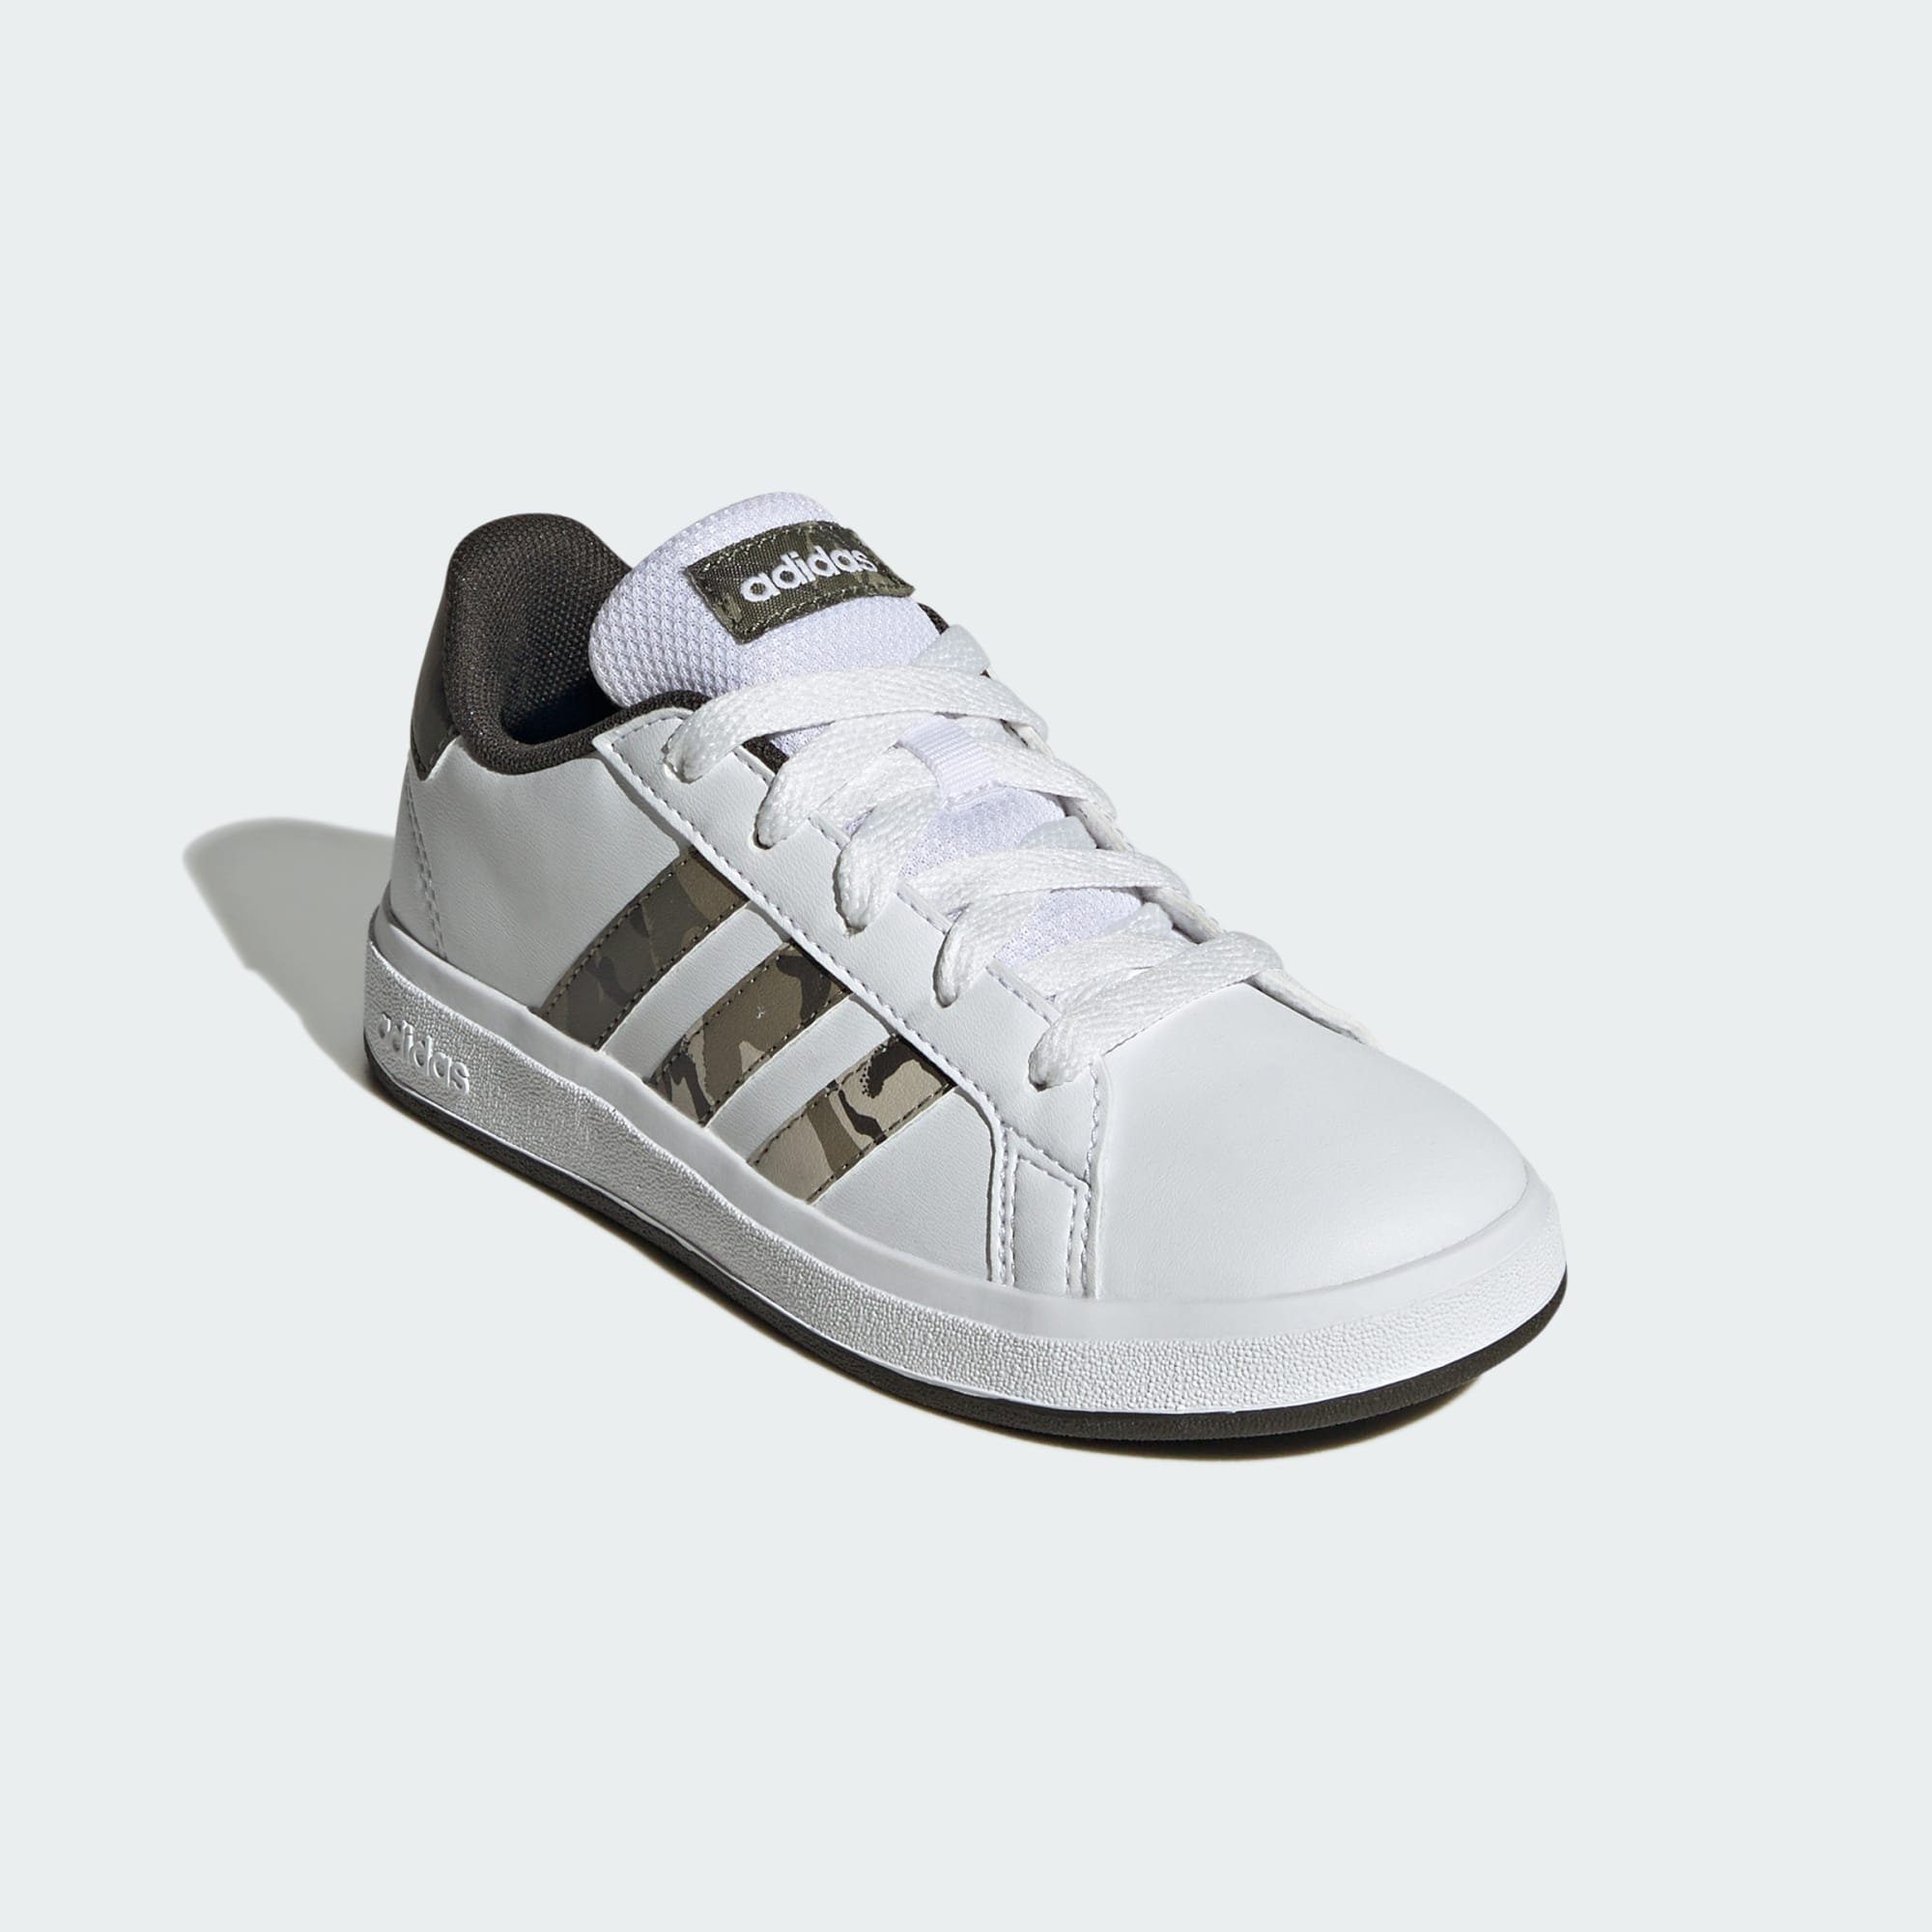 adidas Sportswear GRAND COURT 2.0 SHOES KIDS Sneaker Cloud White / Olive Strata / Shadow Olive